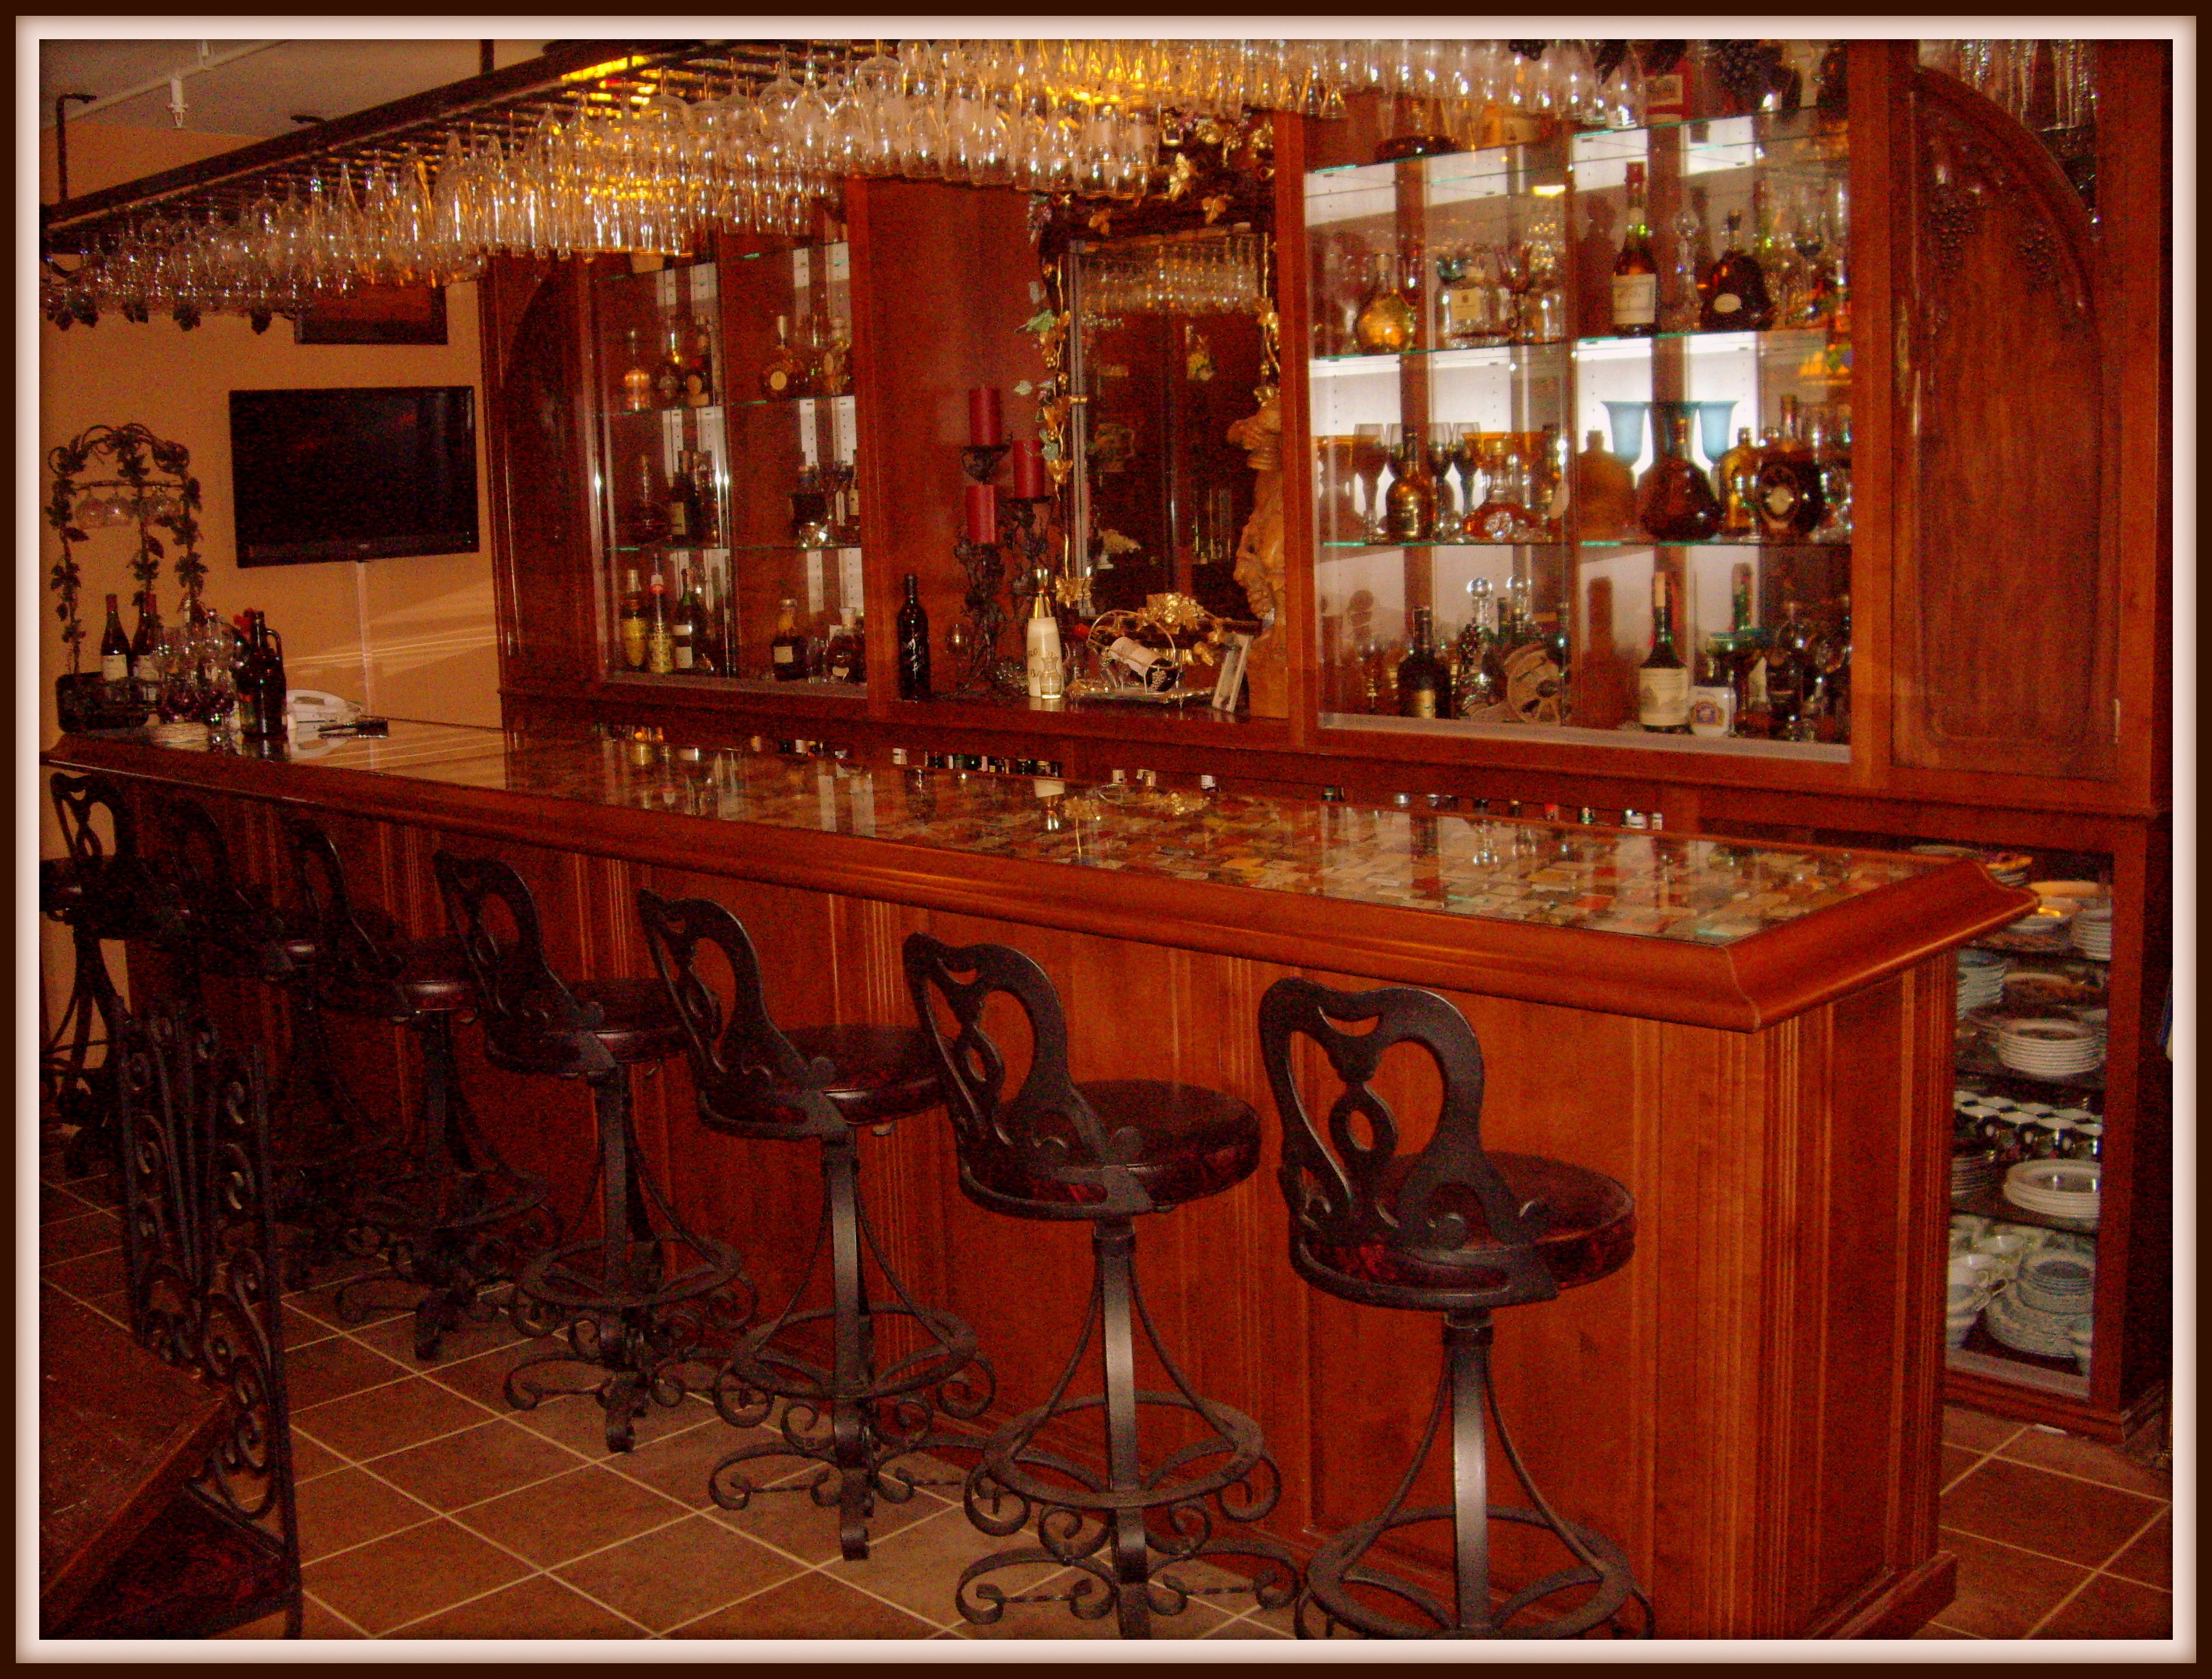  custom bar and bar room has been featured in several magazines